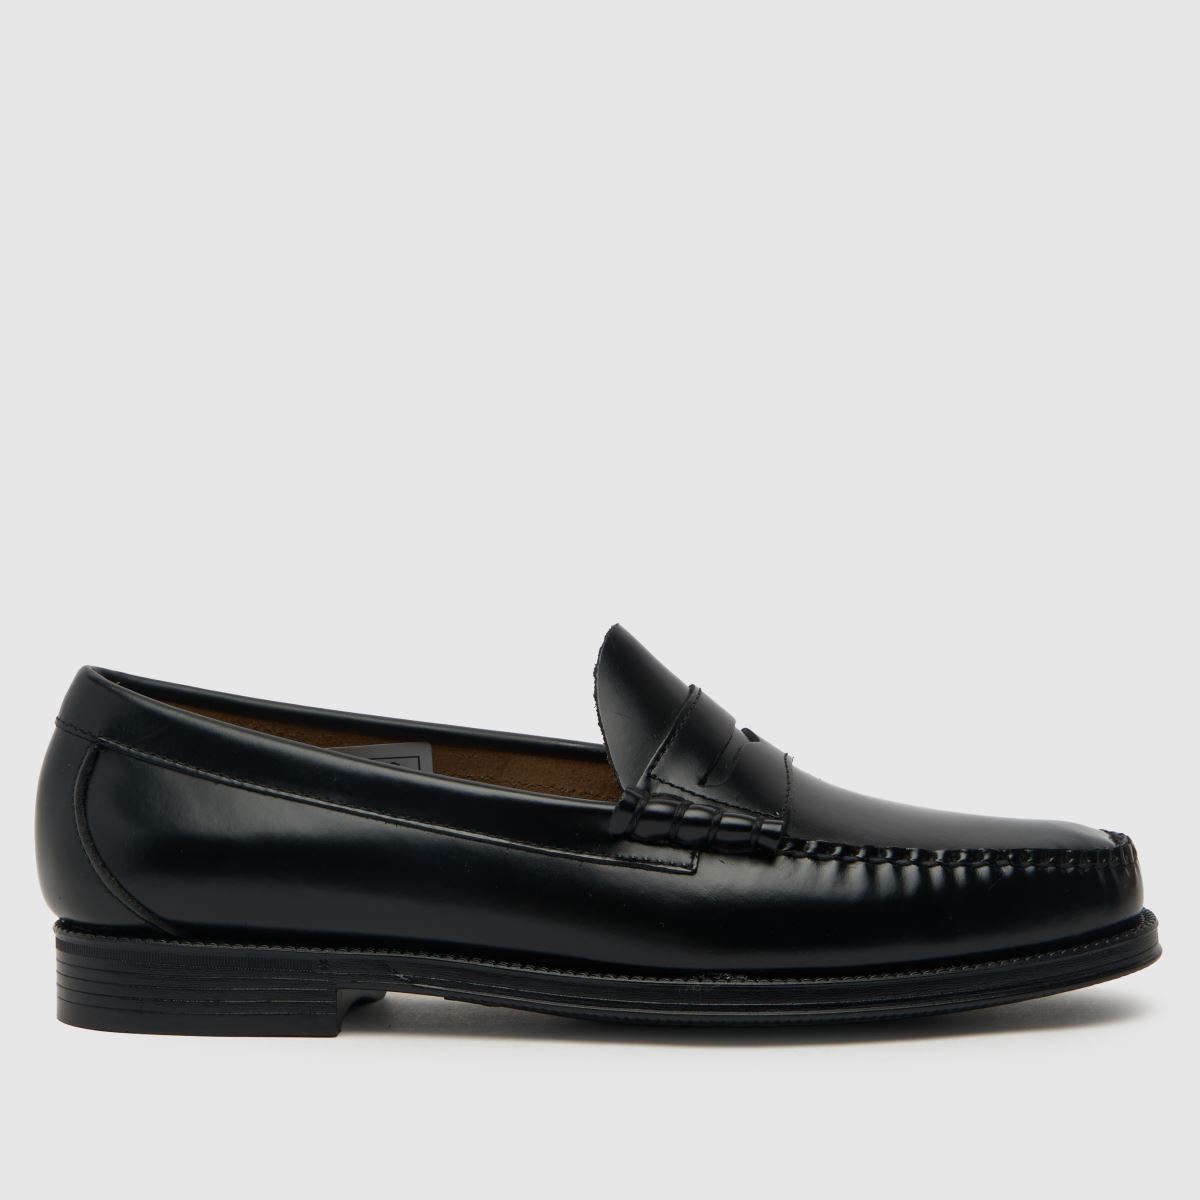 G.H. BASS easy weejuns larson loafer shoes in black